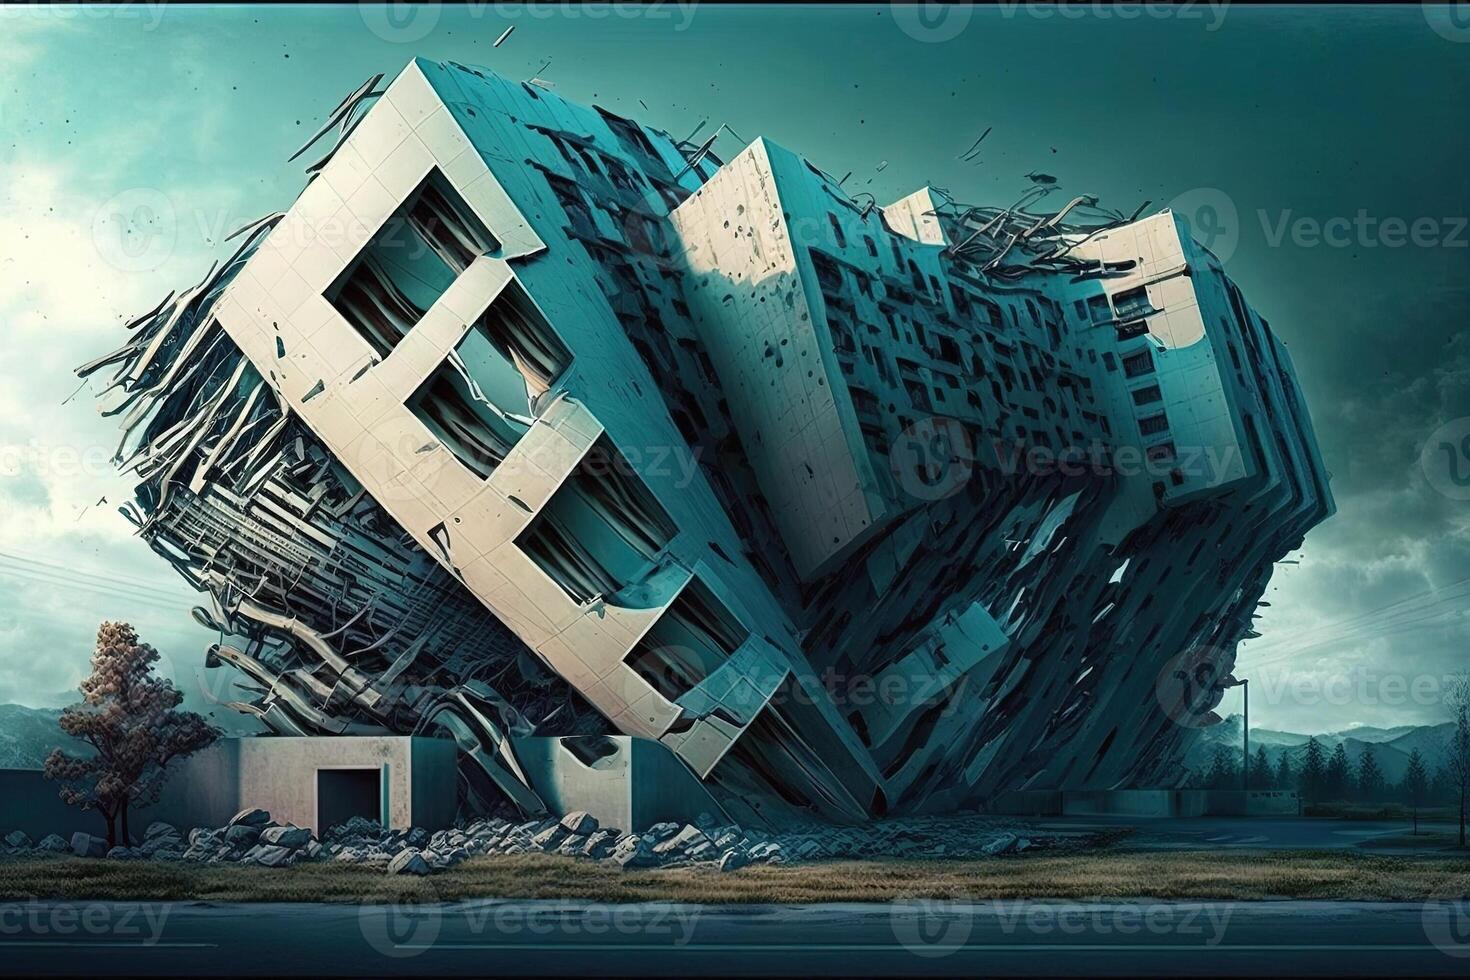 Self-Repairing Structures. Buildings of the future that can automatically detect and repair damage, making them more resilient, sustainable, and efficient illustration photo